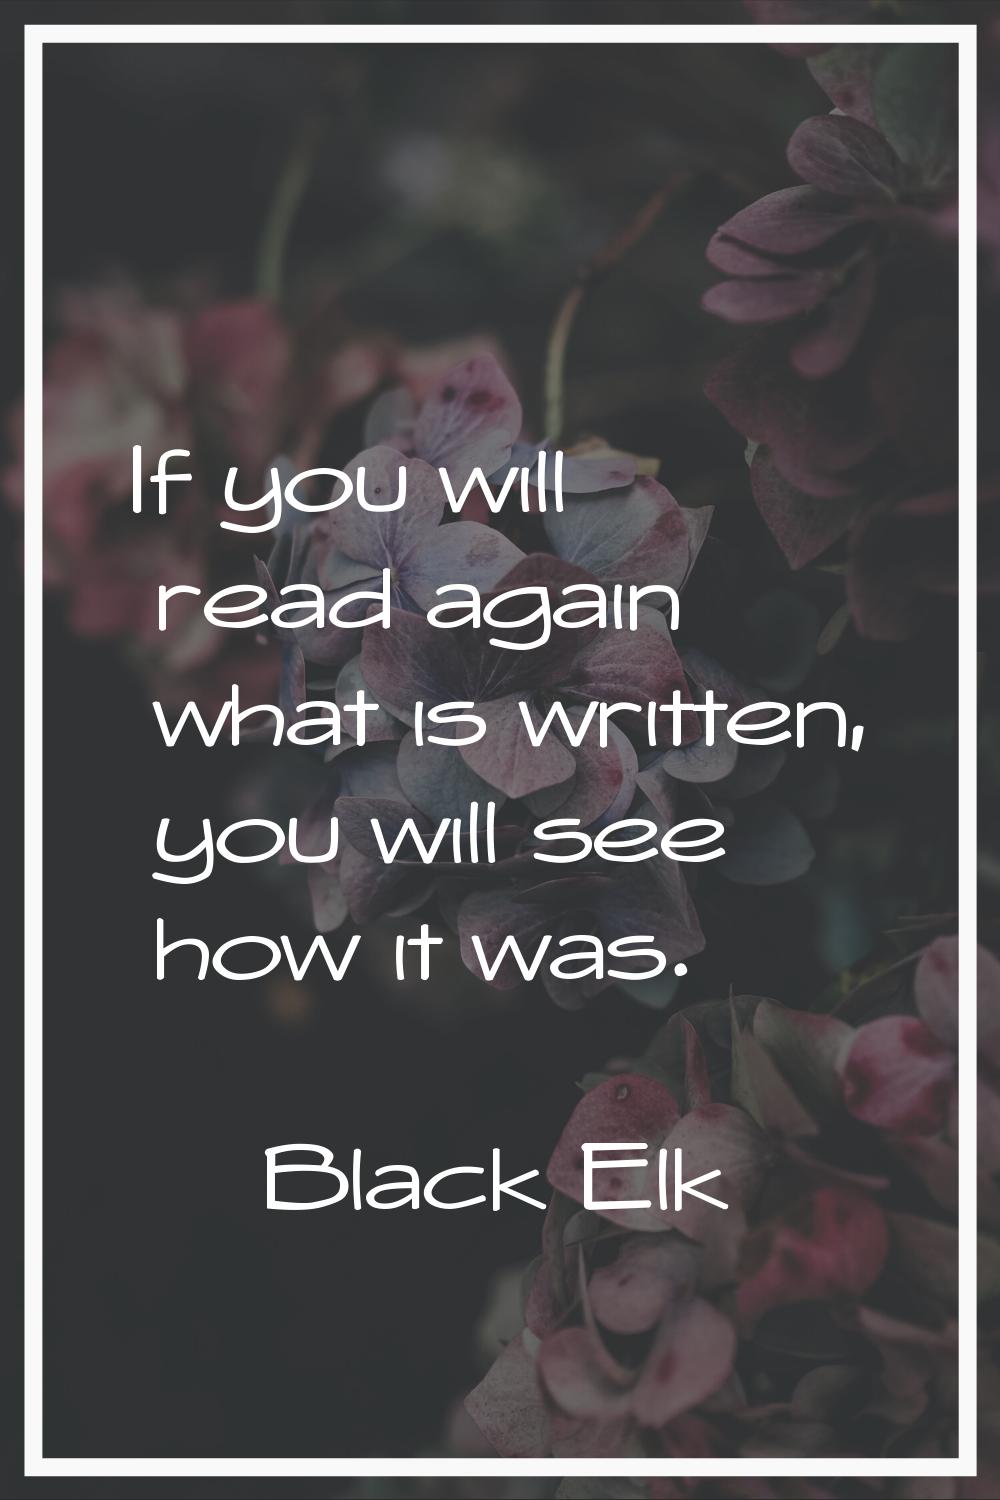 If you will read again what is written, you will see how it was.